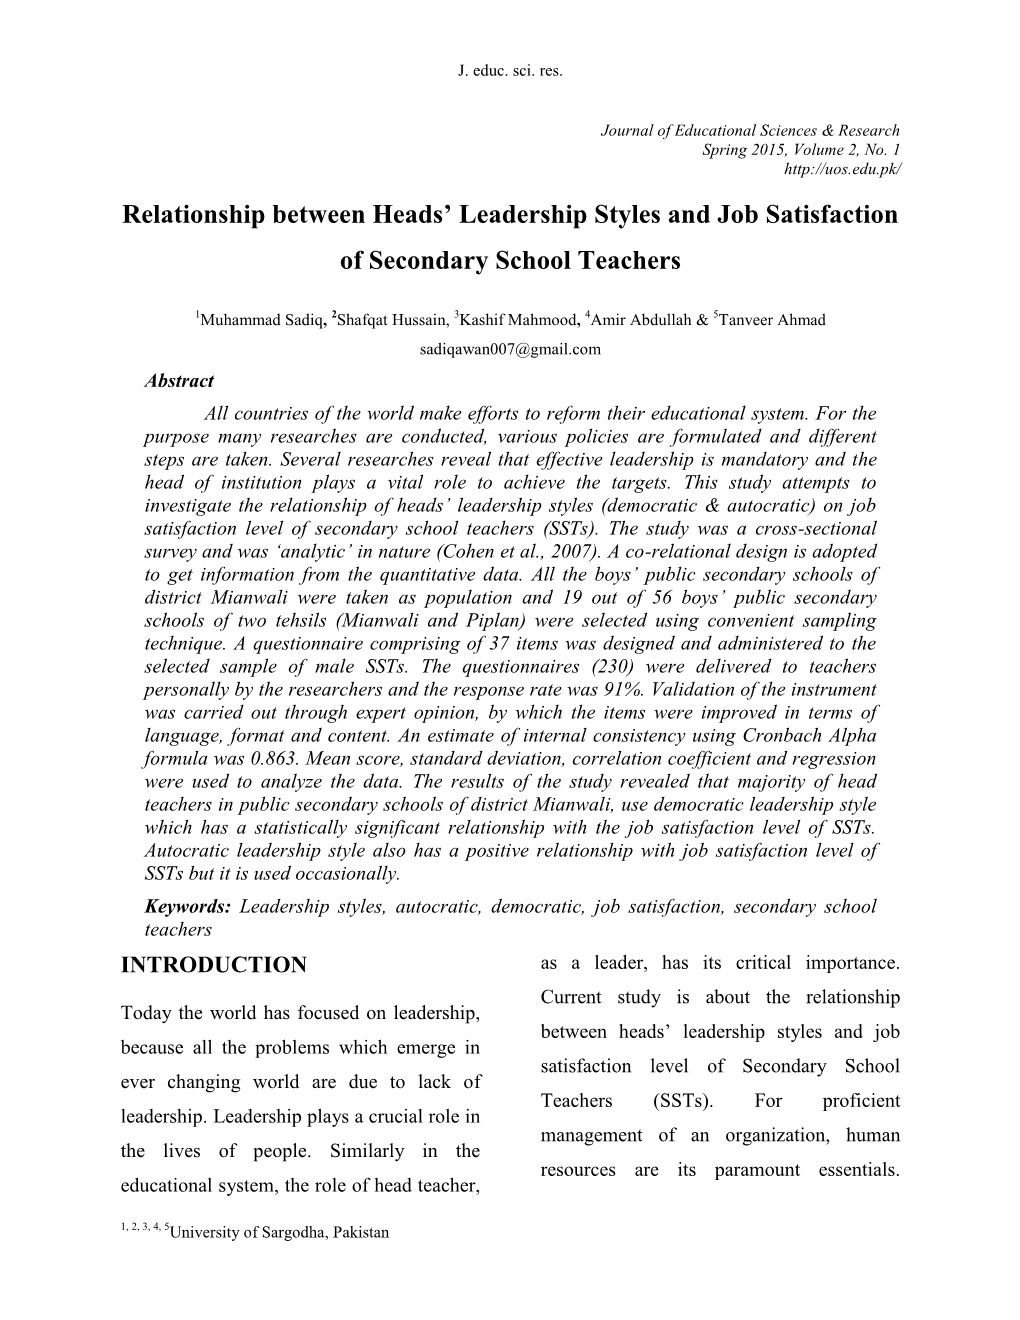 Relationship Between Heads' Leadership Styles and Job